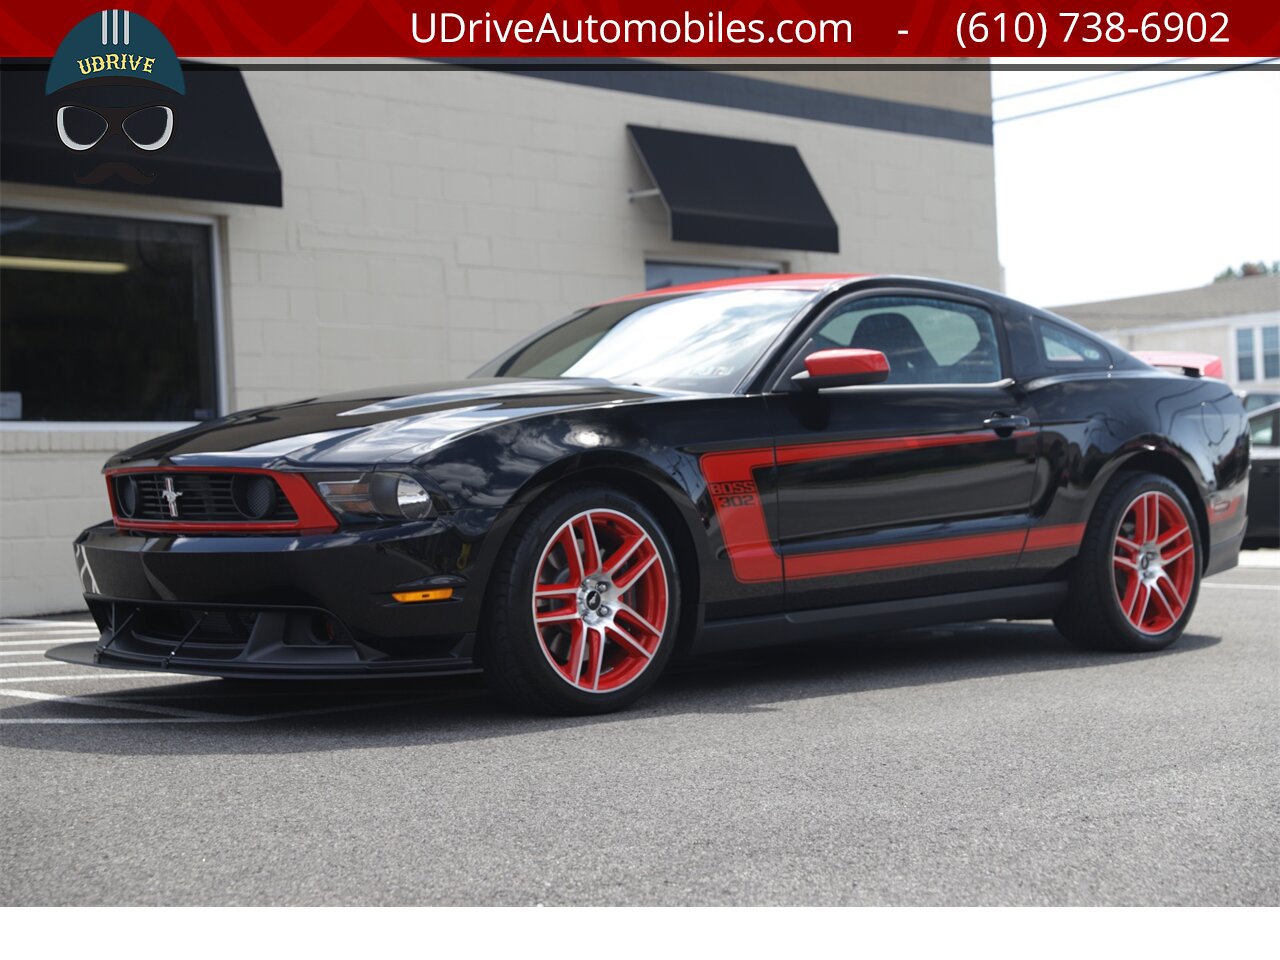 2012 Ford Mustang 866 Miles Boss 302 Laguna Seca #338 of 750  Red TracKey Activated - Photo 8 - West Chester, PA 19382